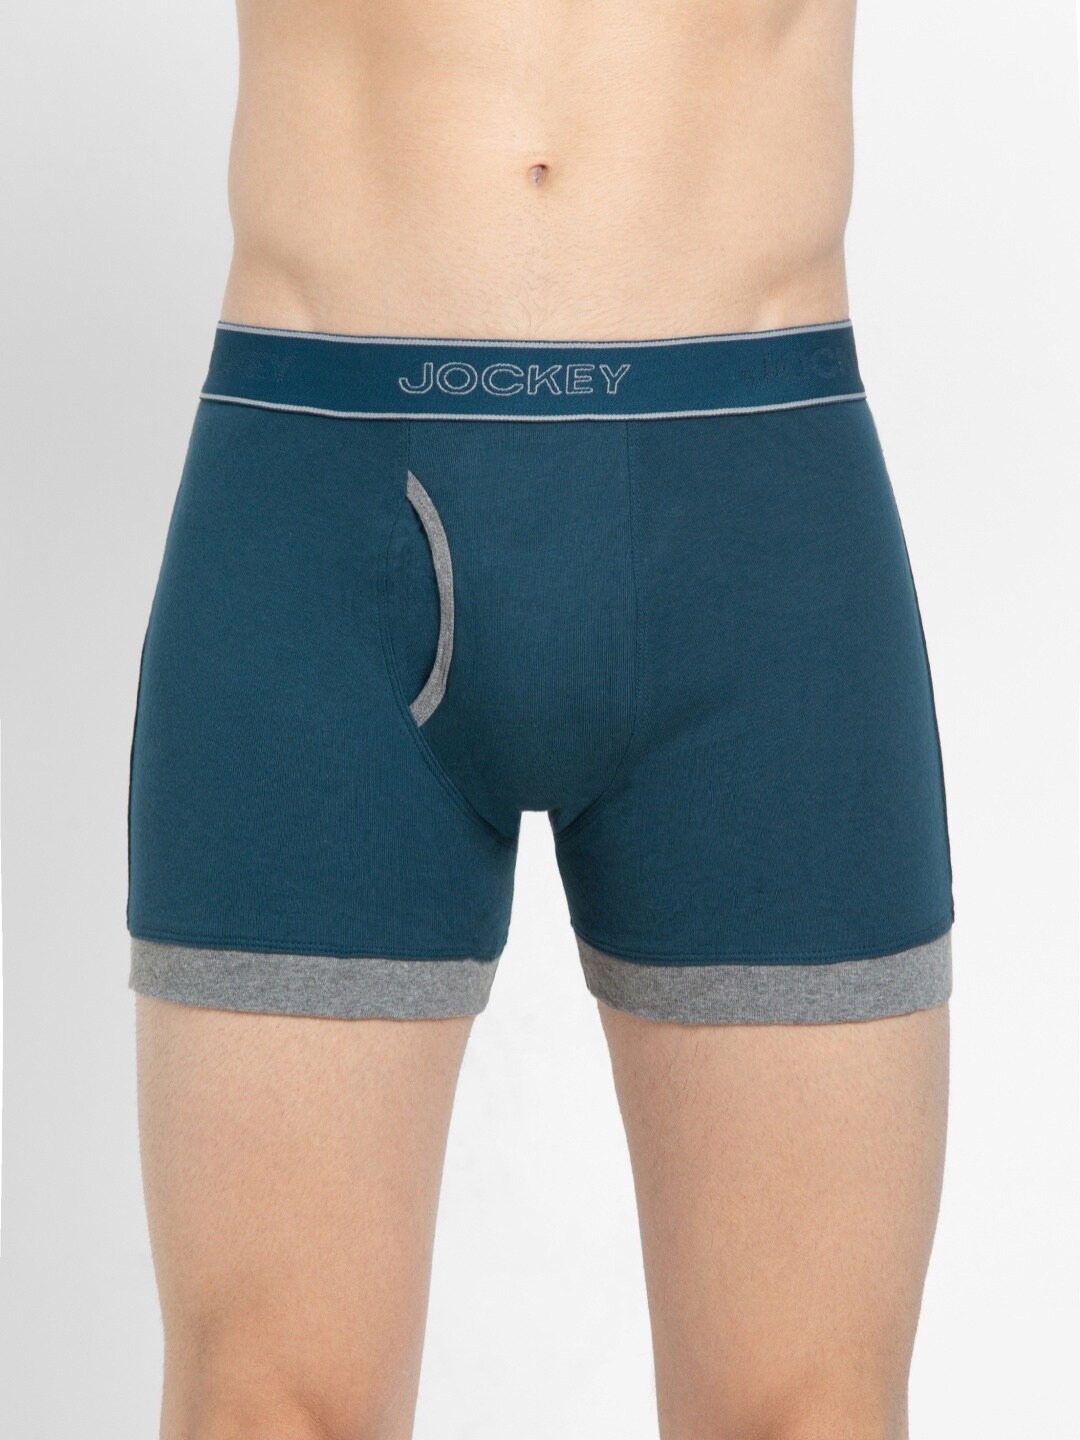 Jockey Men Pack of 2 Assorted Pure Cotton Boxer Brief 1017 0201 RP MM